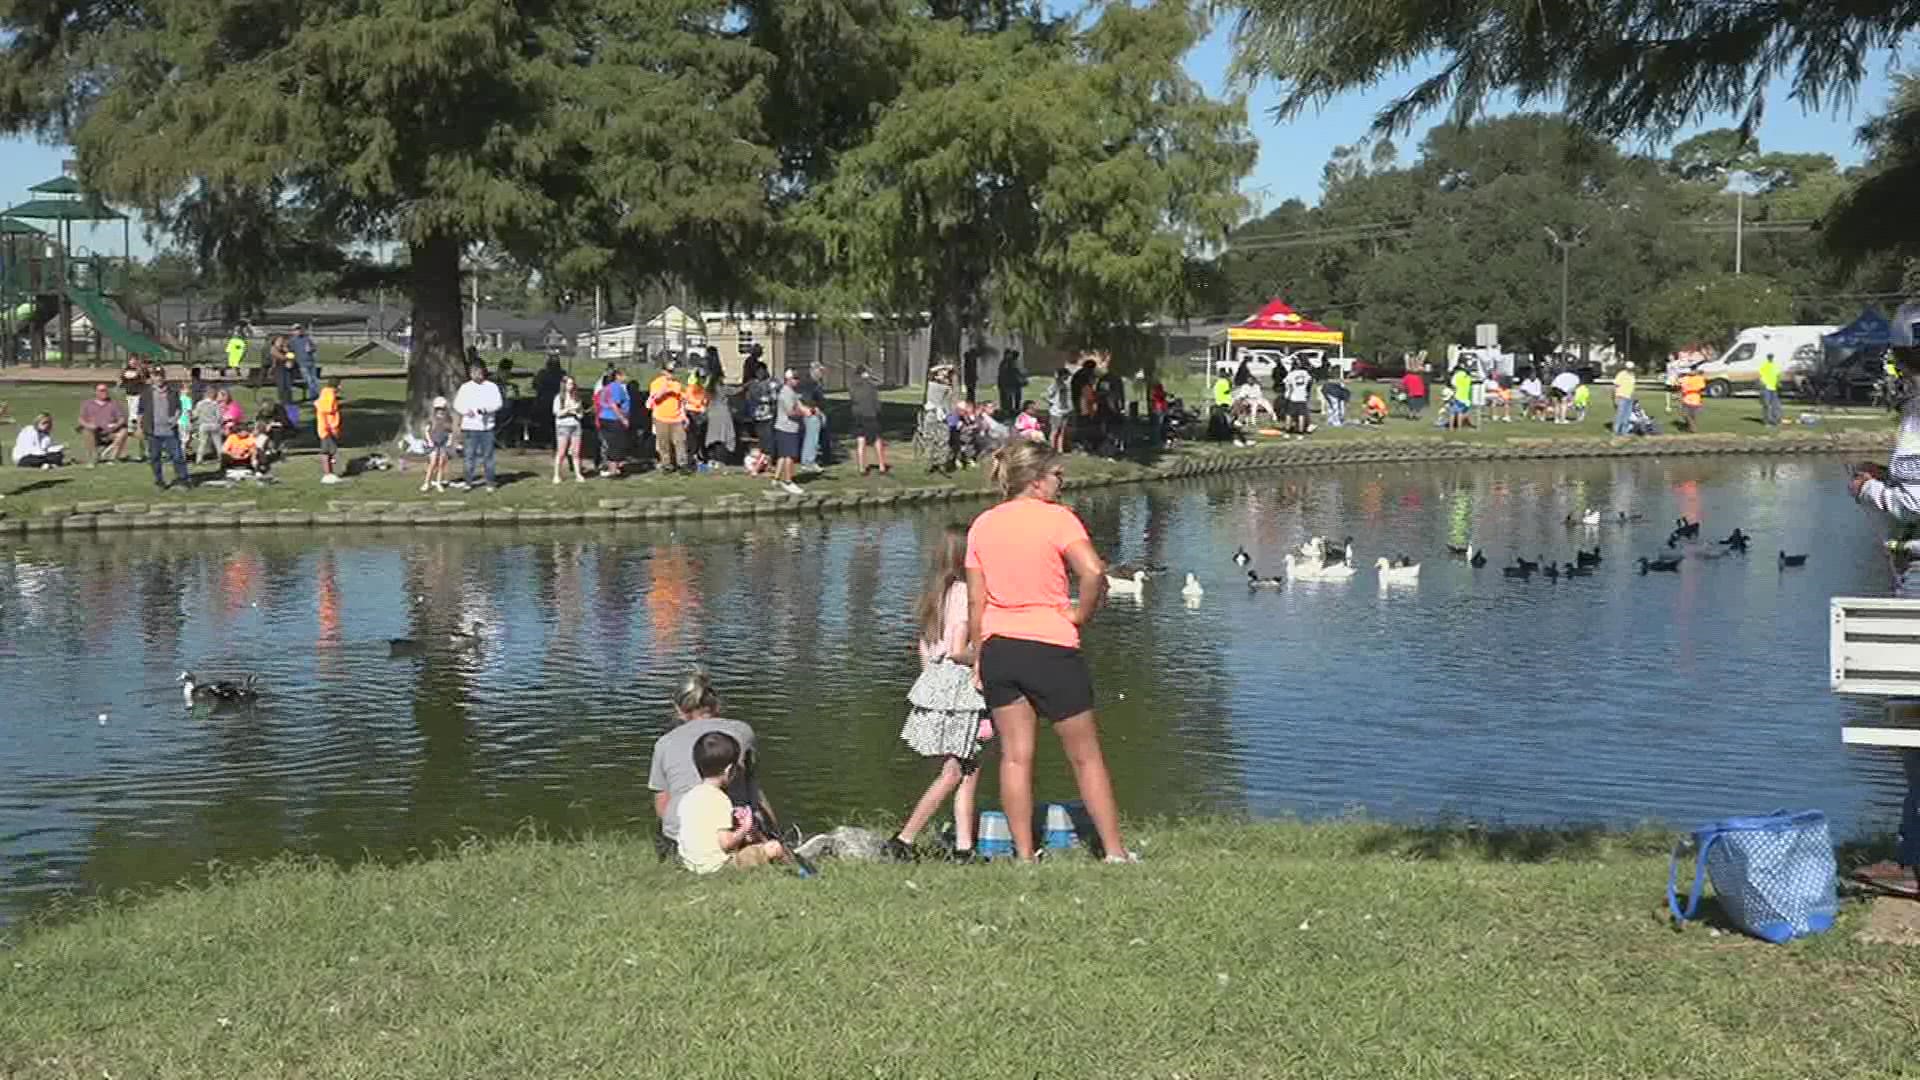 A Saturday event at Doornbos Park in Nederland marked year two of a fishing tournament hosted by Adaptive Sports for Kids.